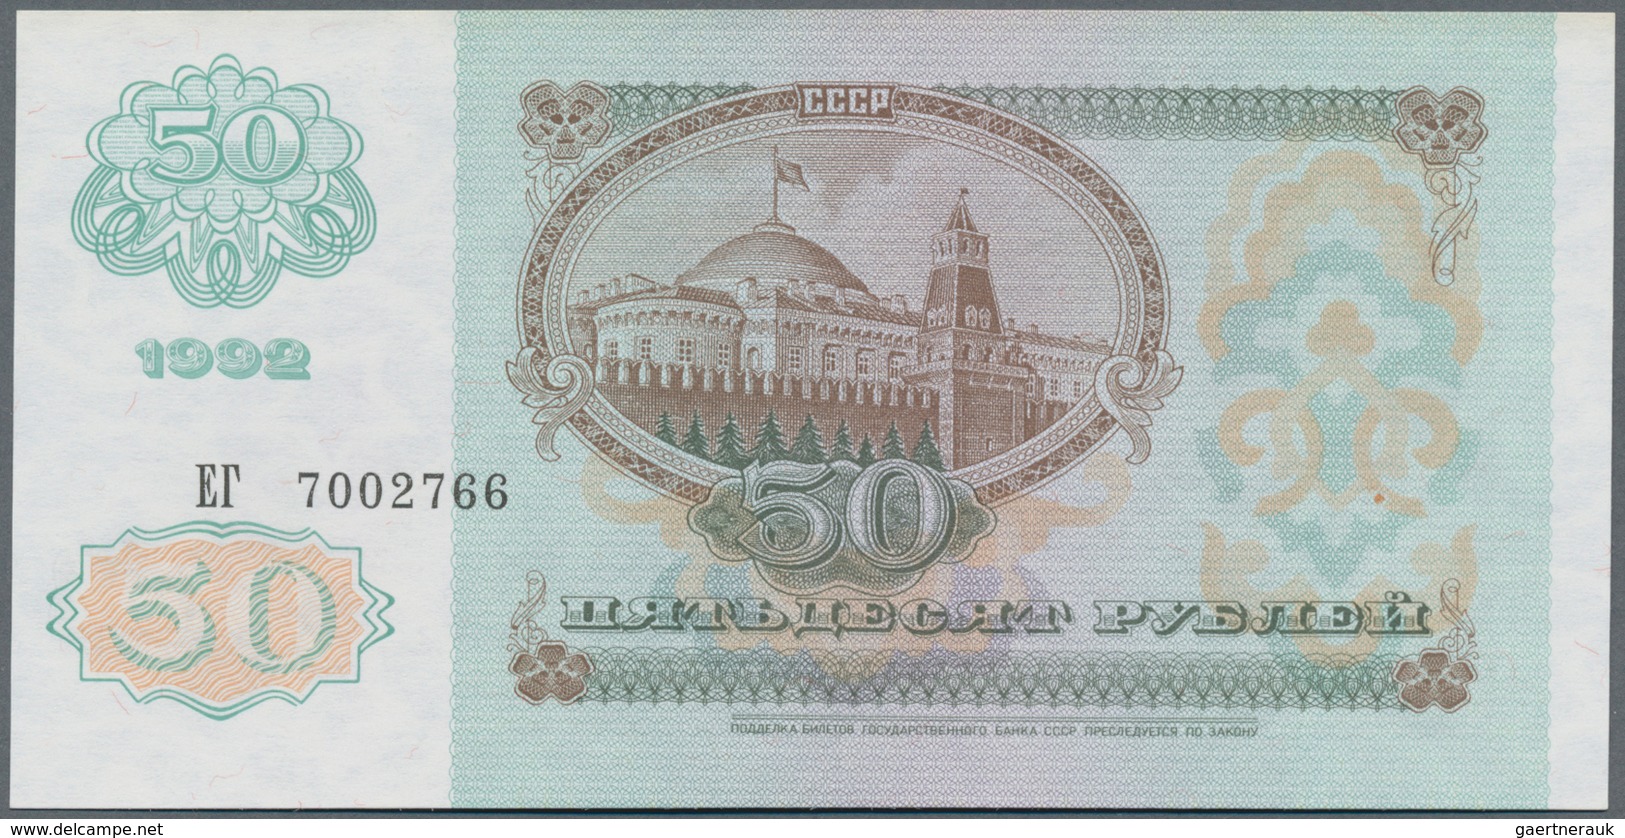 Russia / Russland: Set with 21 Banknotes 1 - 1000 Rubles 1960-1992, P.222-224, 233-250 in VF to UNC